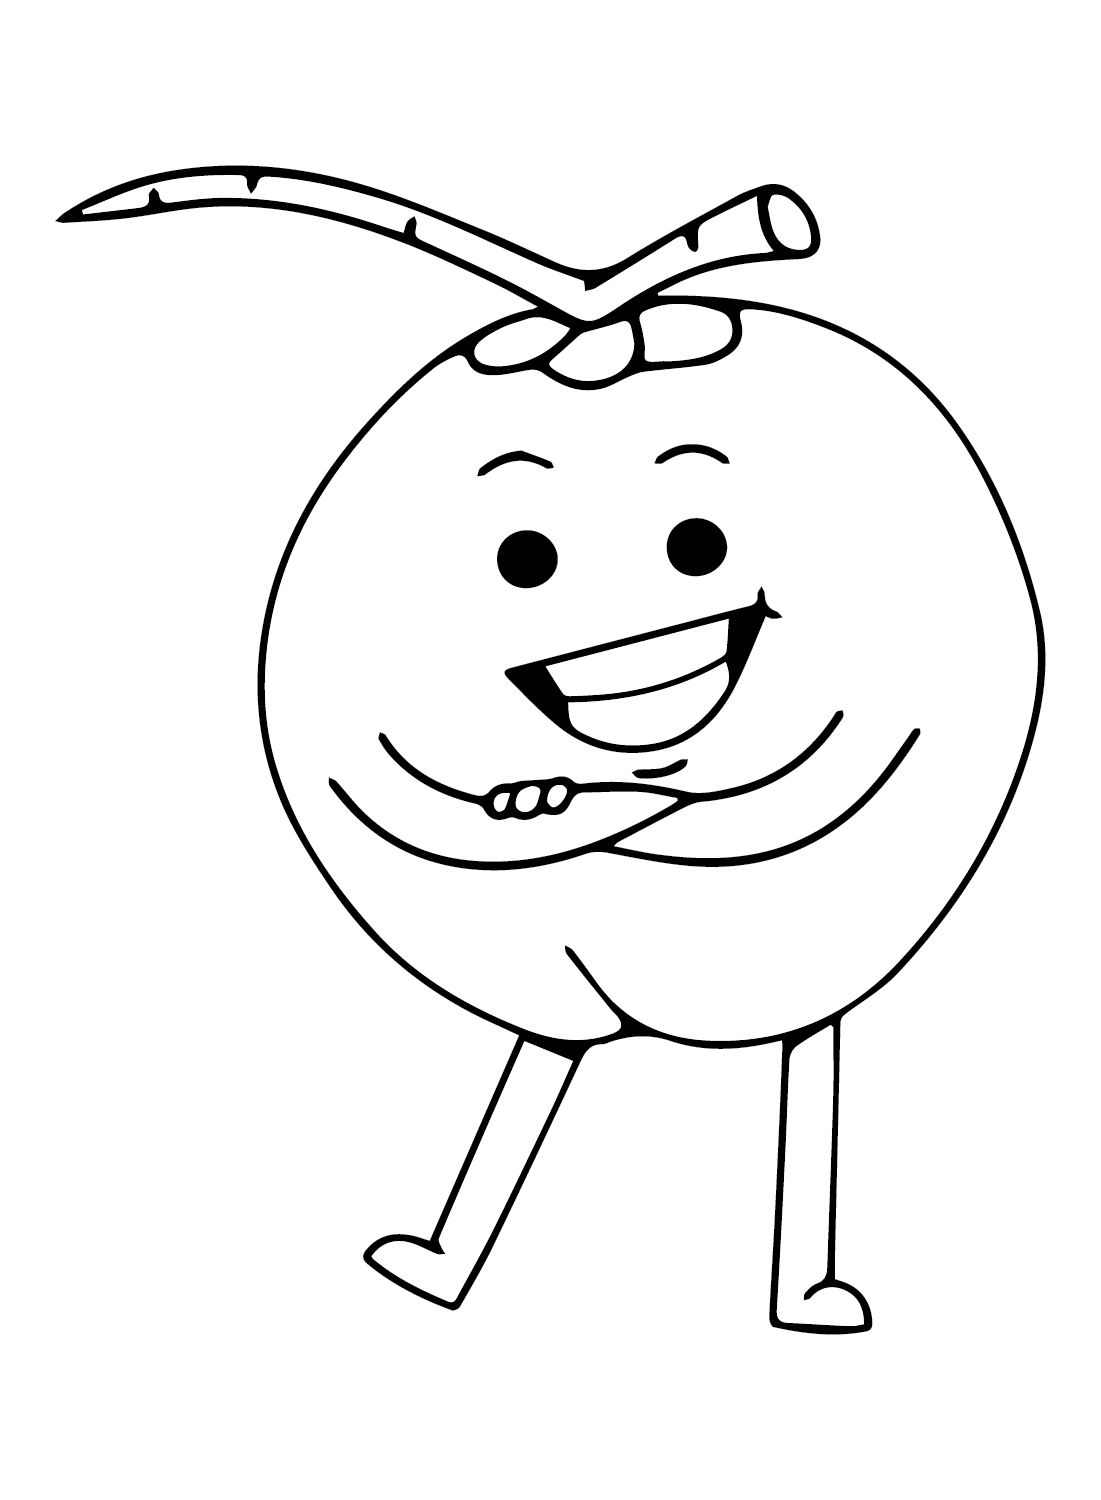 Cute Coconut Coloring Page